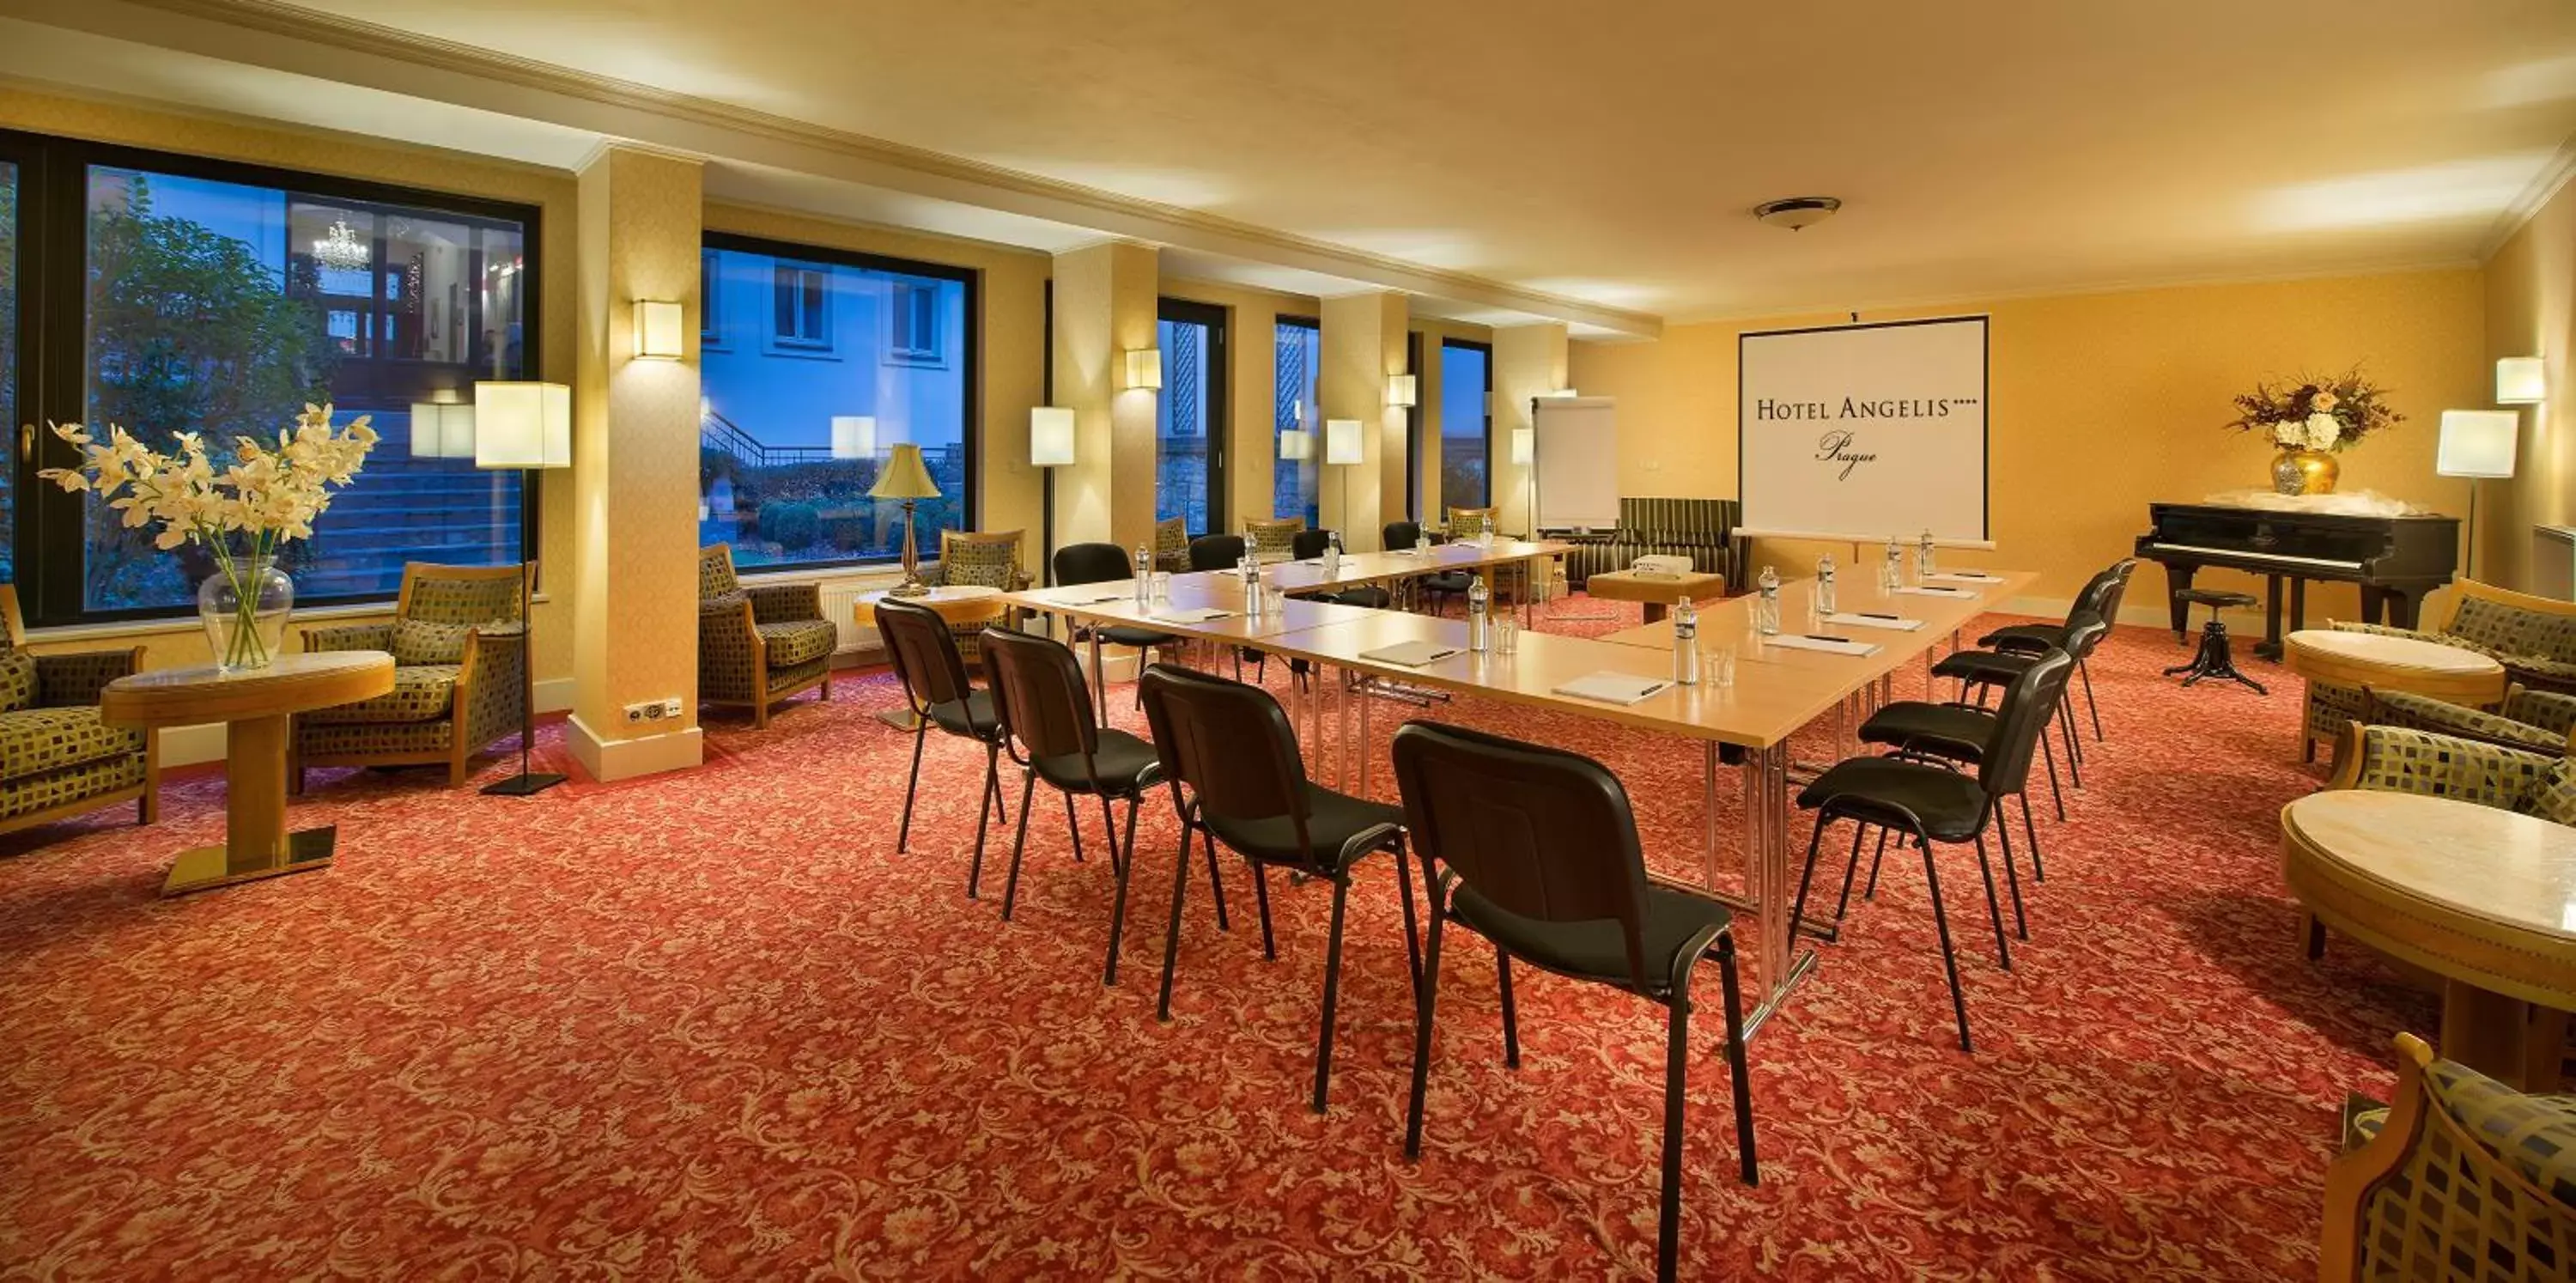 Meeting/conference room in Angelis